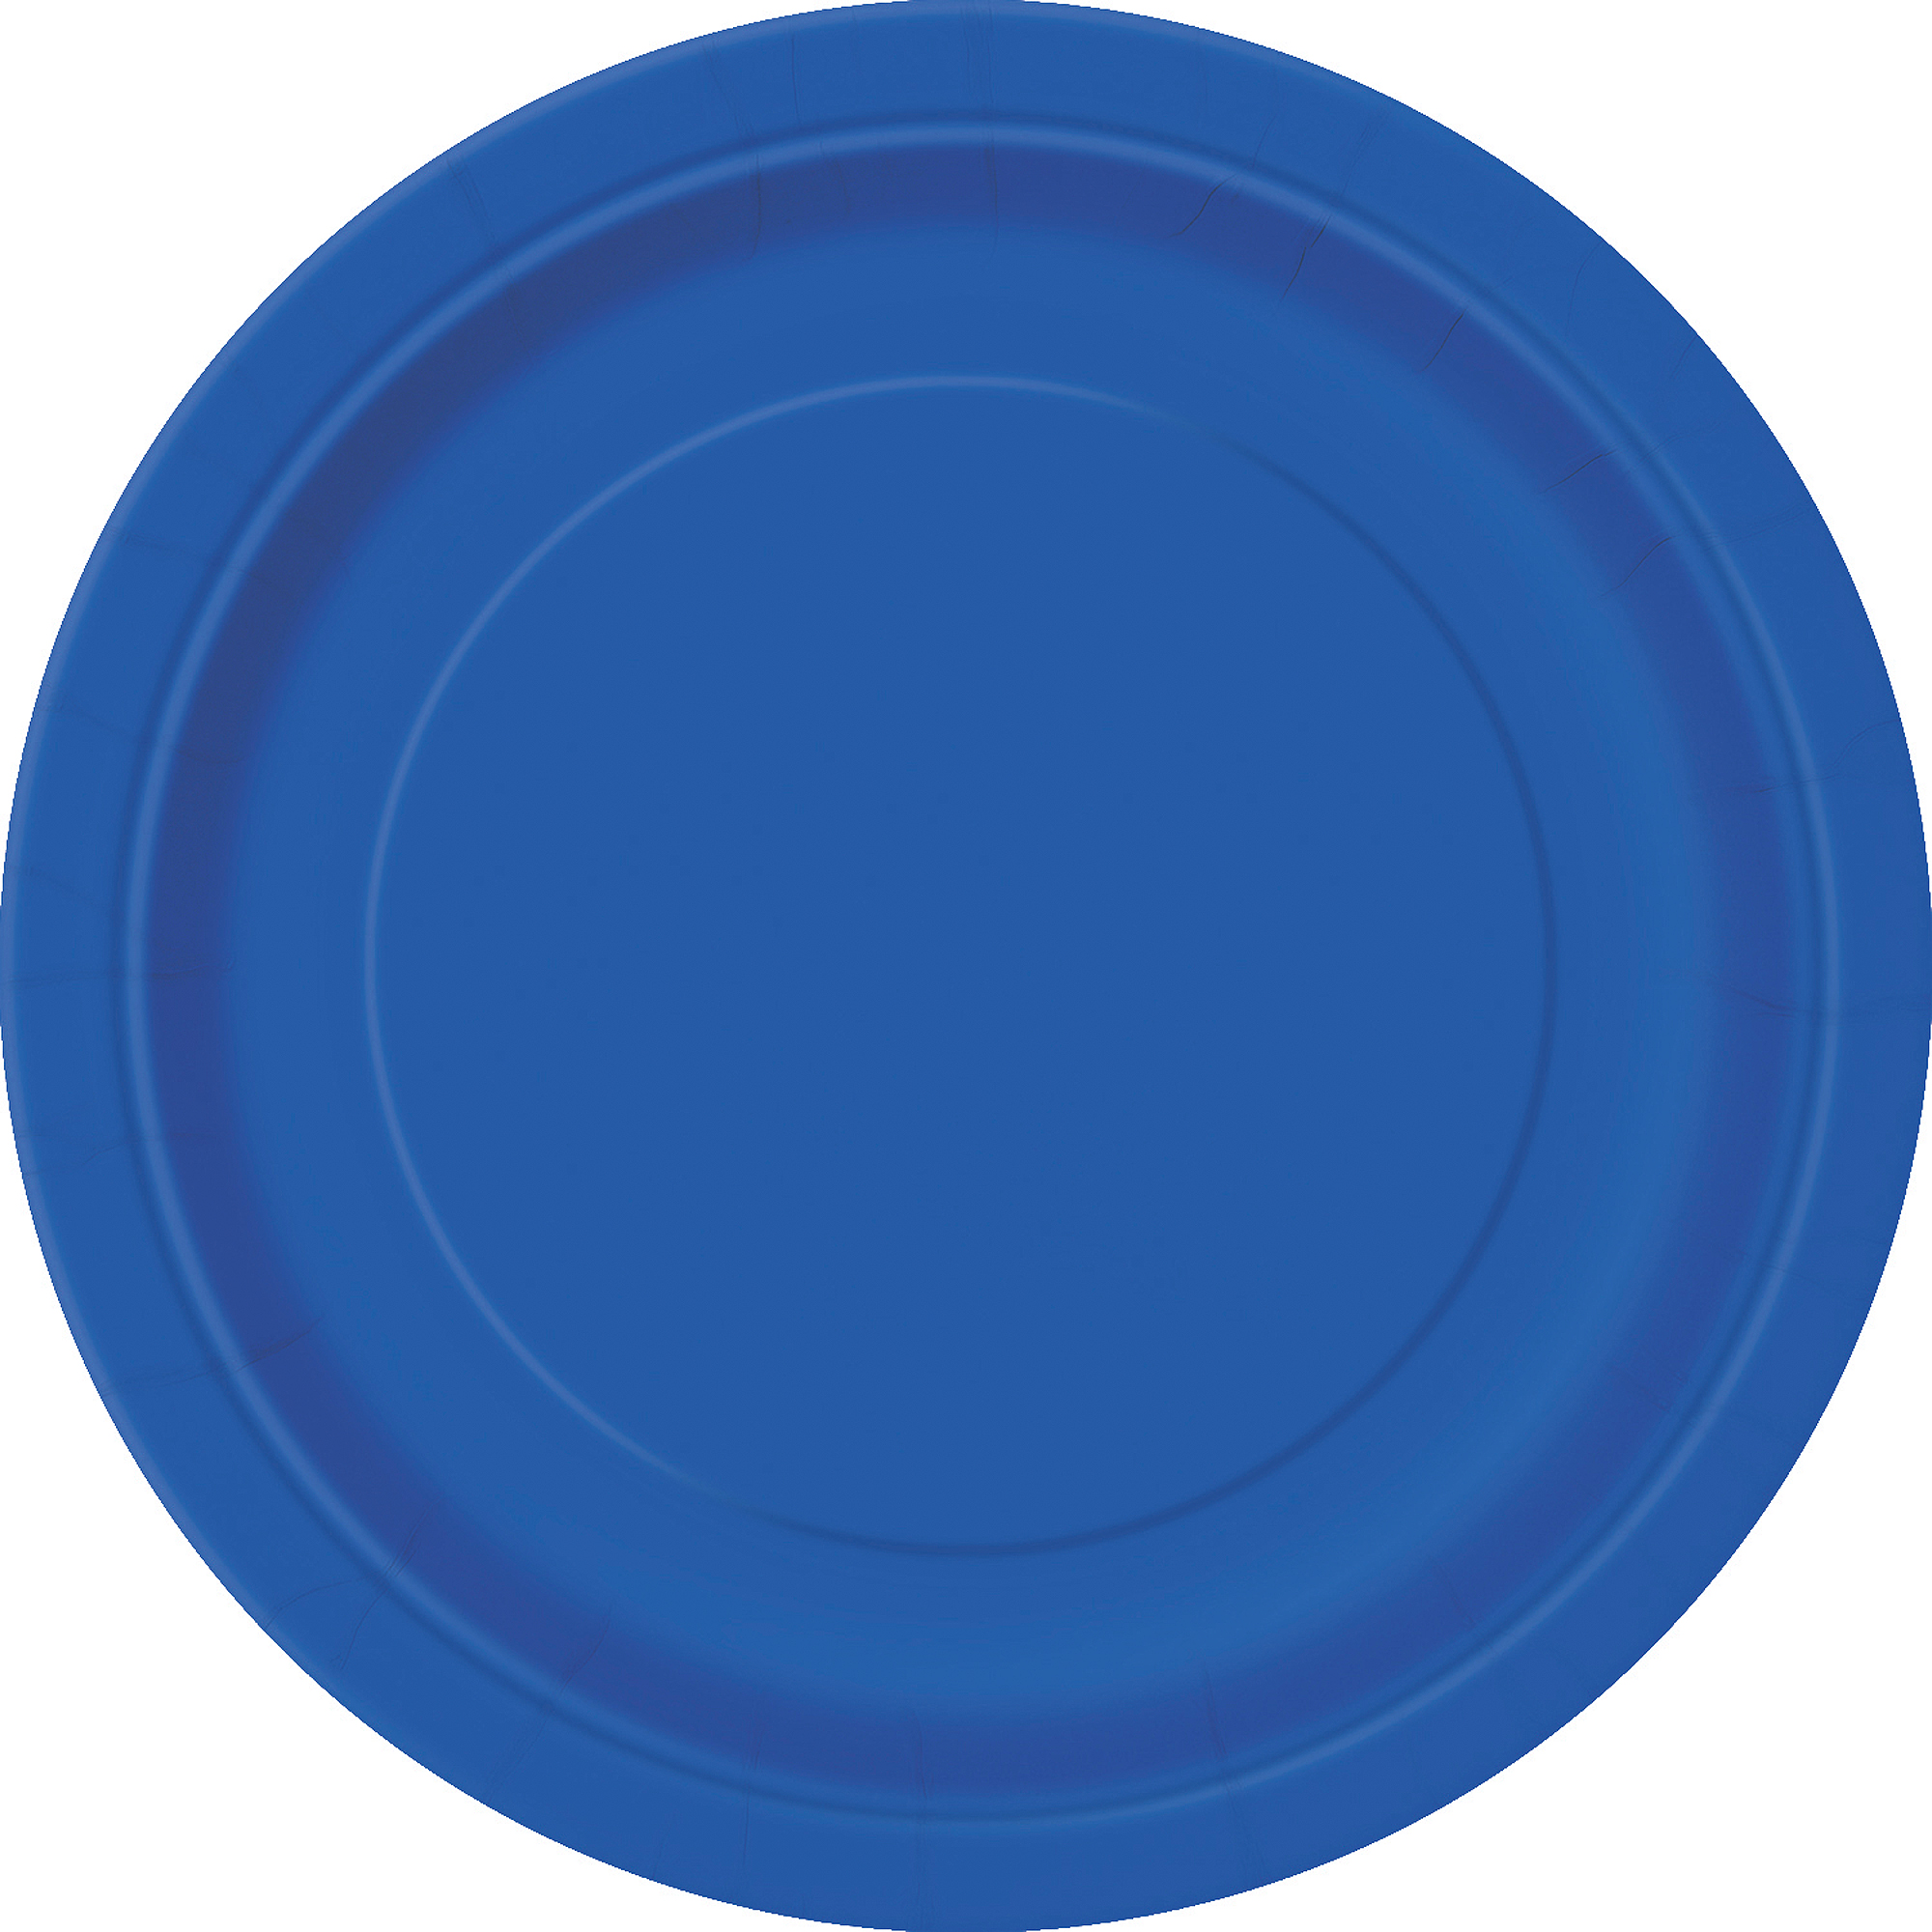 Blue Paper Dinner Plates, 9in, 55ct - image 1 of 1